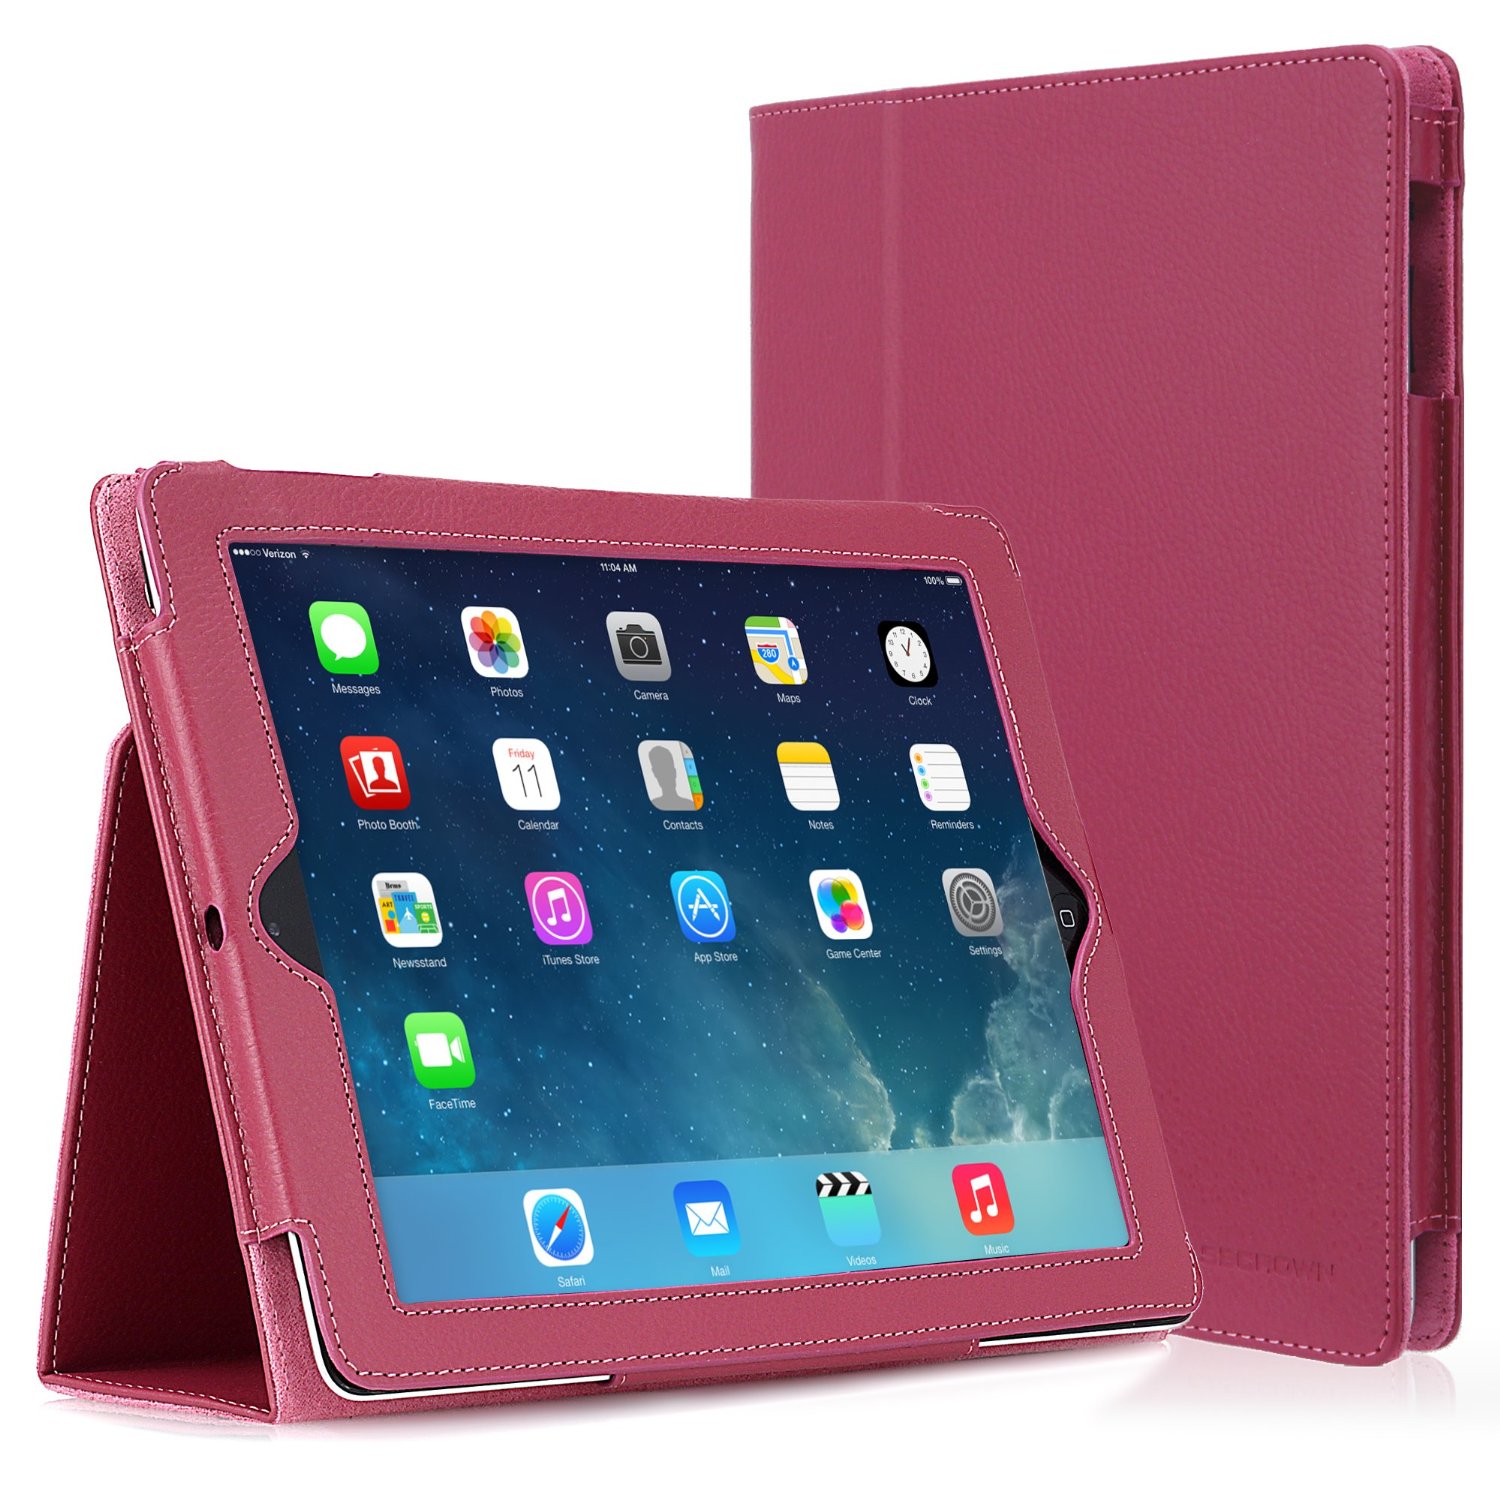 cases for new ipad with retina display